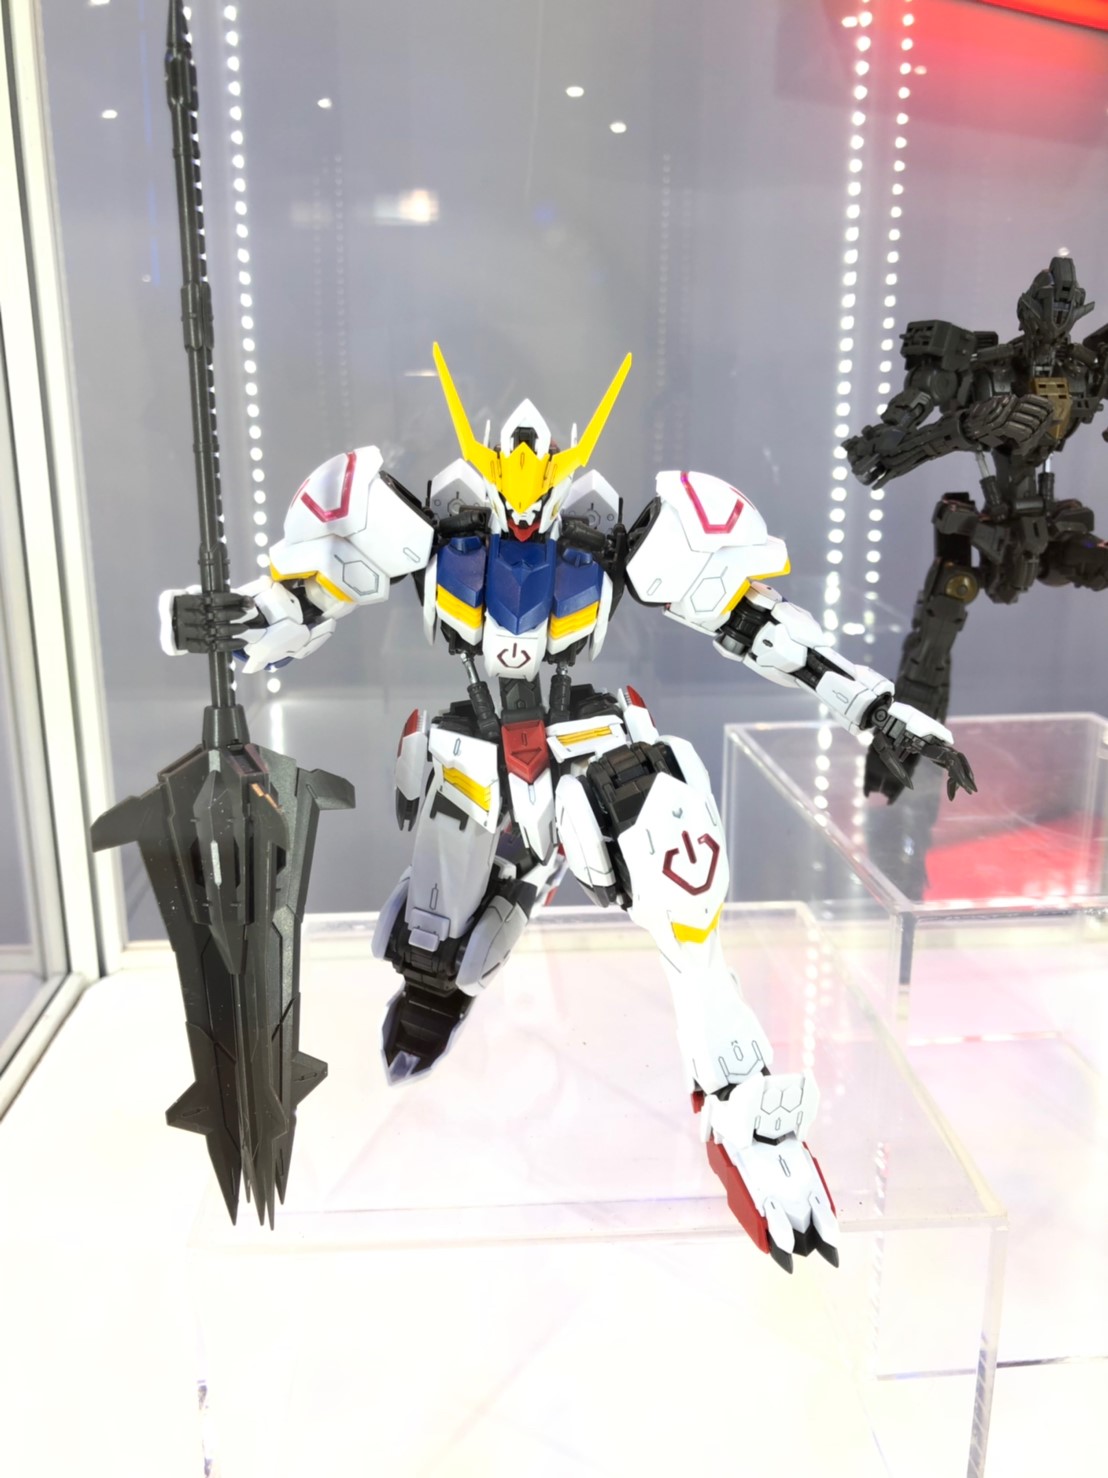 Full report: MG 1/100 FAZZ Ver.Ka / others @ All Japan Model and Hobby Show 2019.